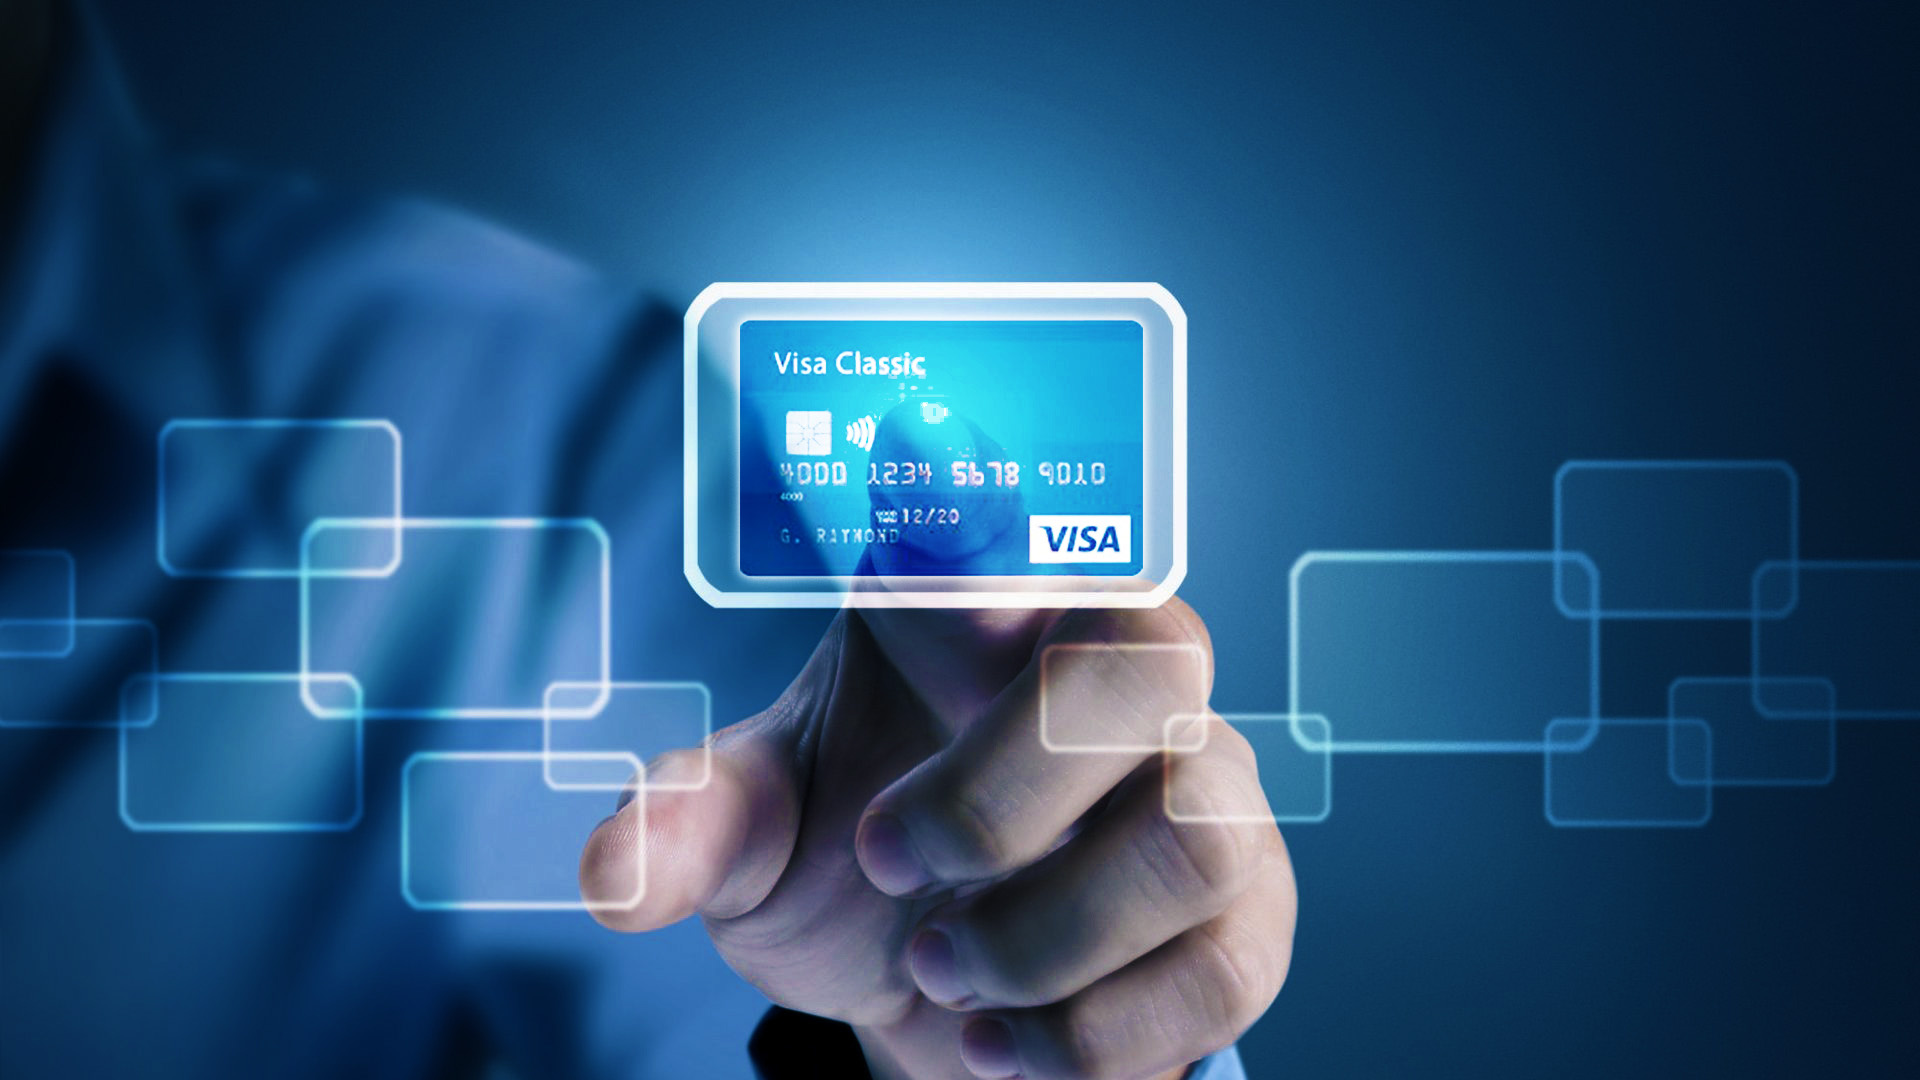 Visa (Card): A virtual financial services, Cryptocurrencies, International payment system. 1920x1080 Full HD Wallpaper.